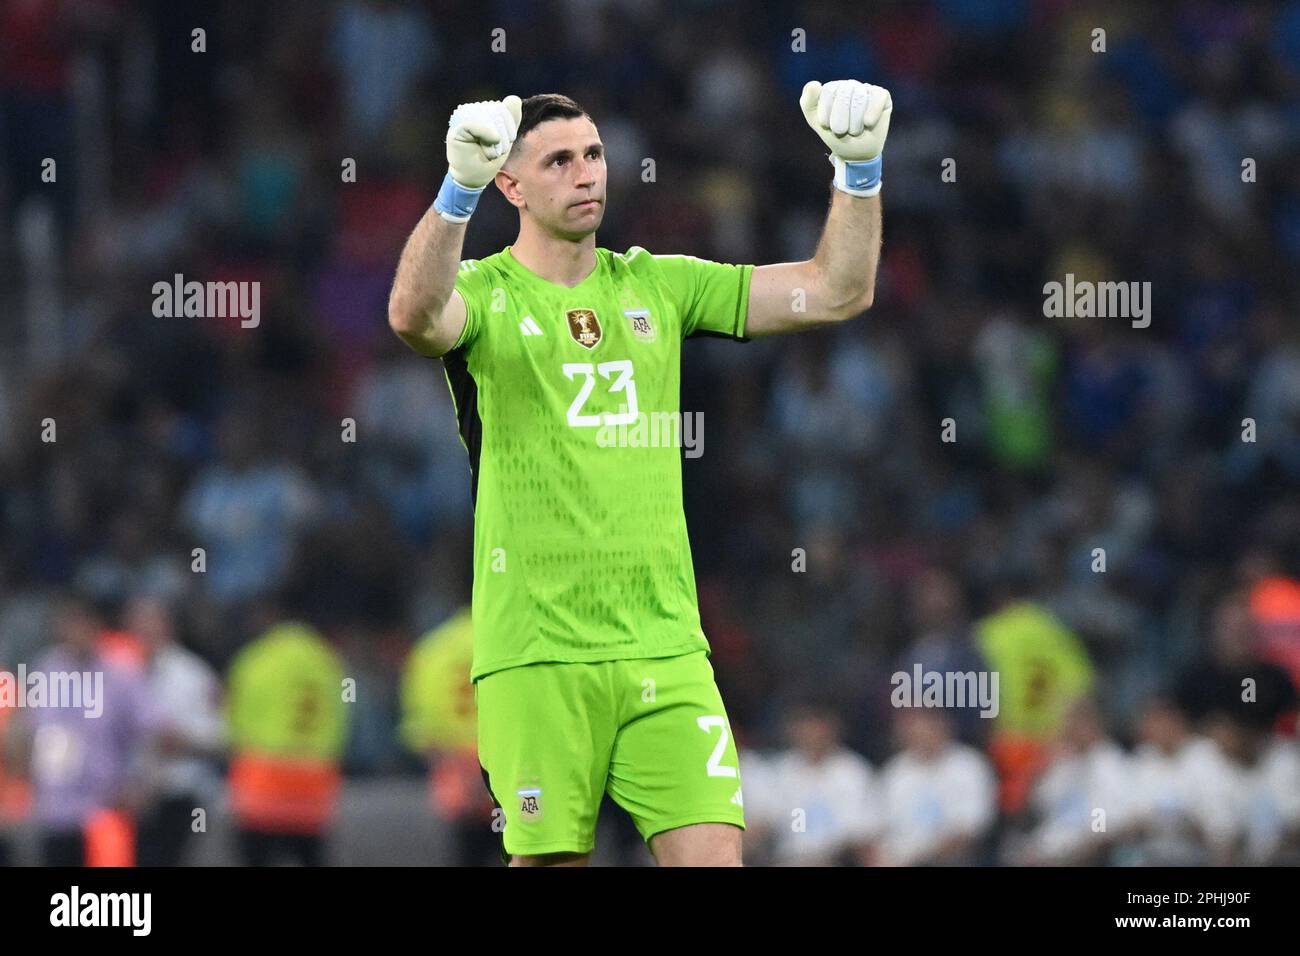 Santiago del Estero, Argentina, 28th Mar, 2023. Emiliano Martinez of Argentina, during the match between Argentina and Curacao, for the International Friendly 2023, at Unico Madre de Ciudades Stadium, in Santiago del Estero on March 28. Photo: Luciano Bisbal/DiaEsportivo/Alamy Live News Stock Photo